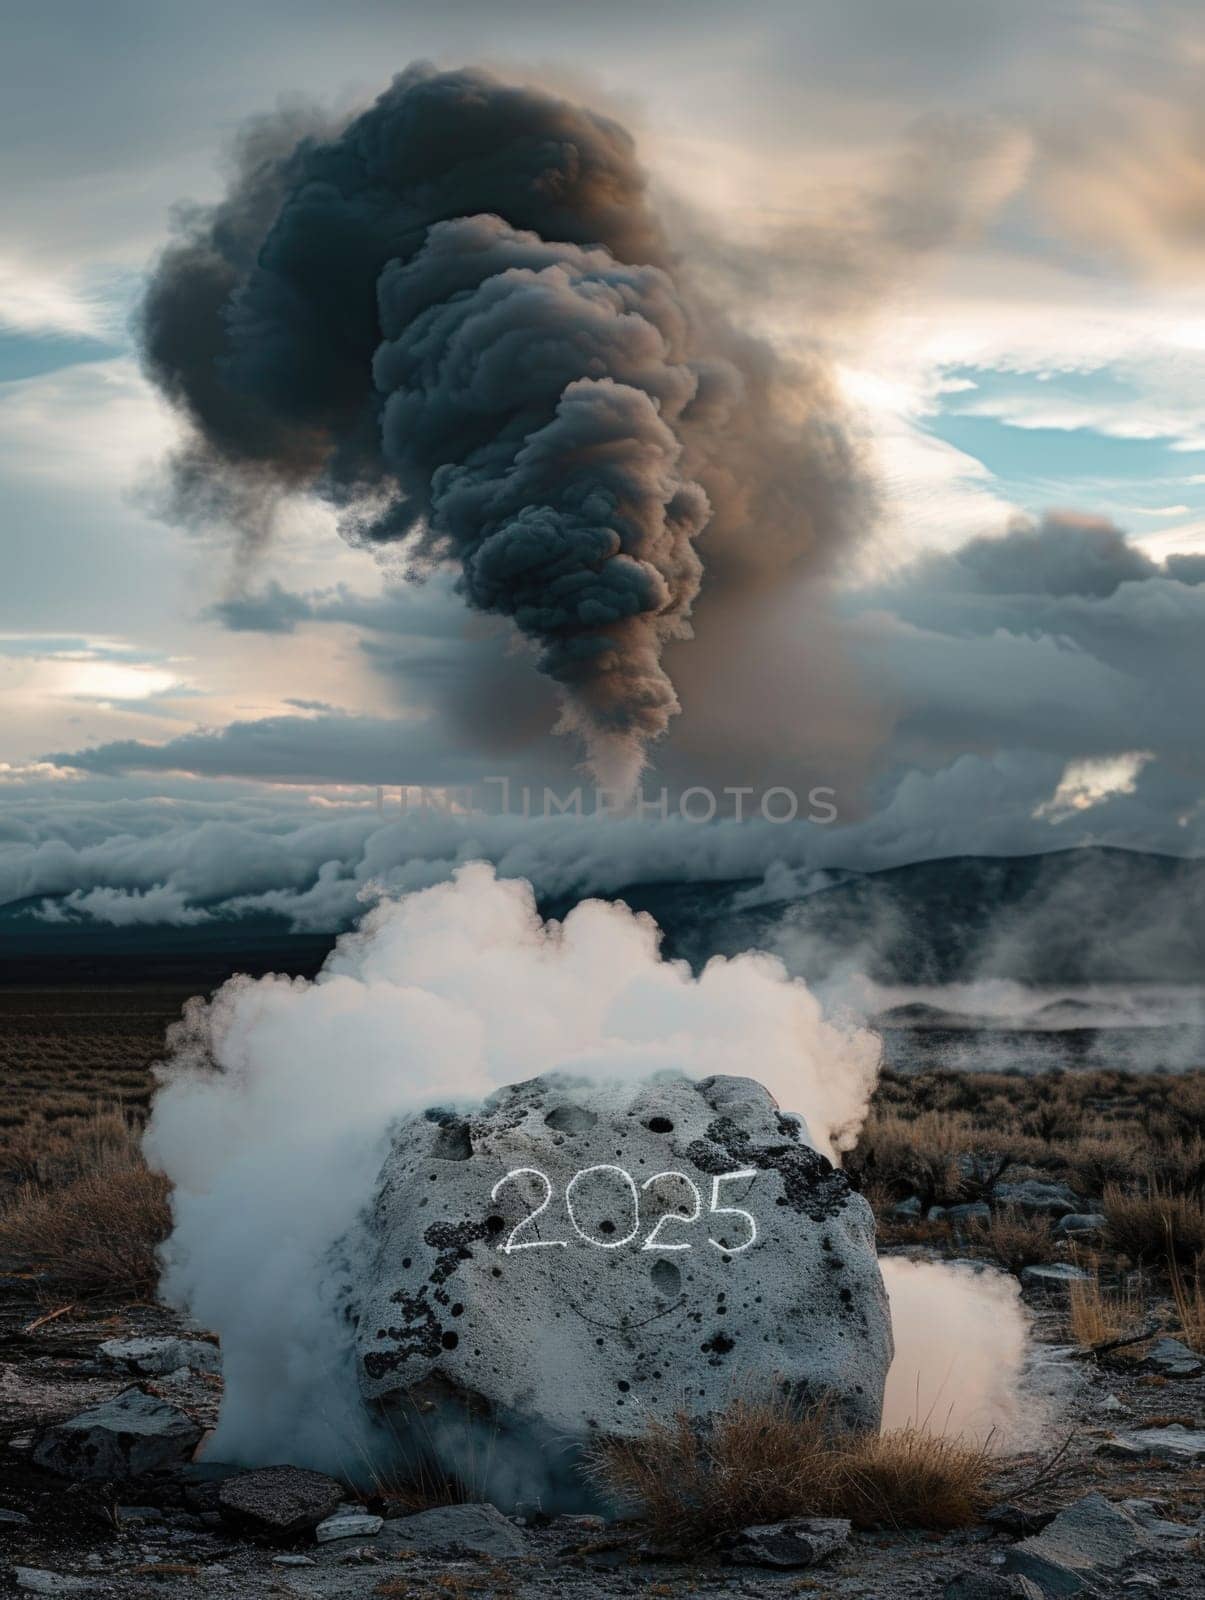 A large plume of smoke billows out from a massive rock, creating a striking visual contrast.